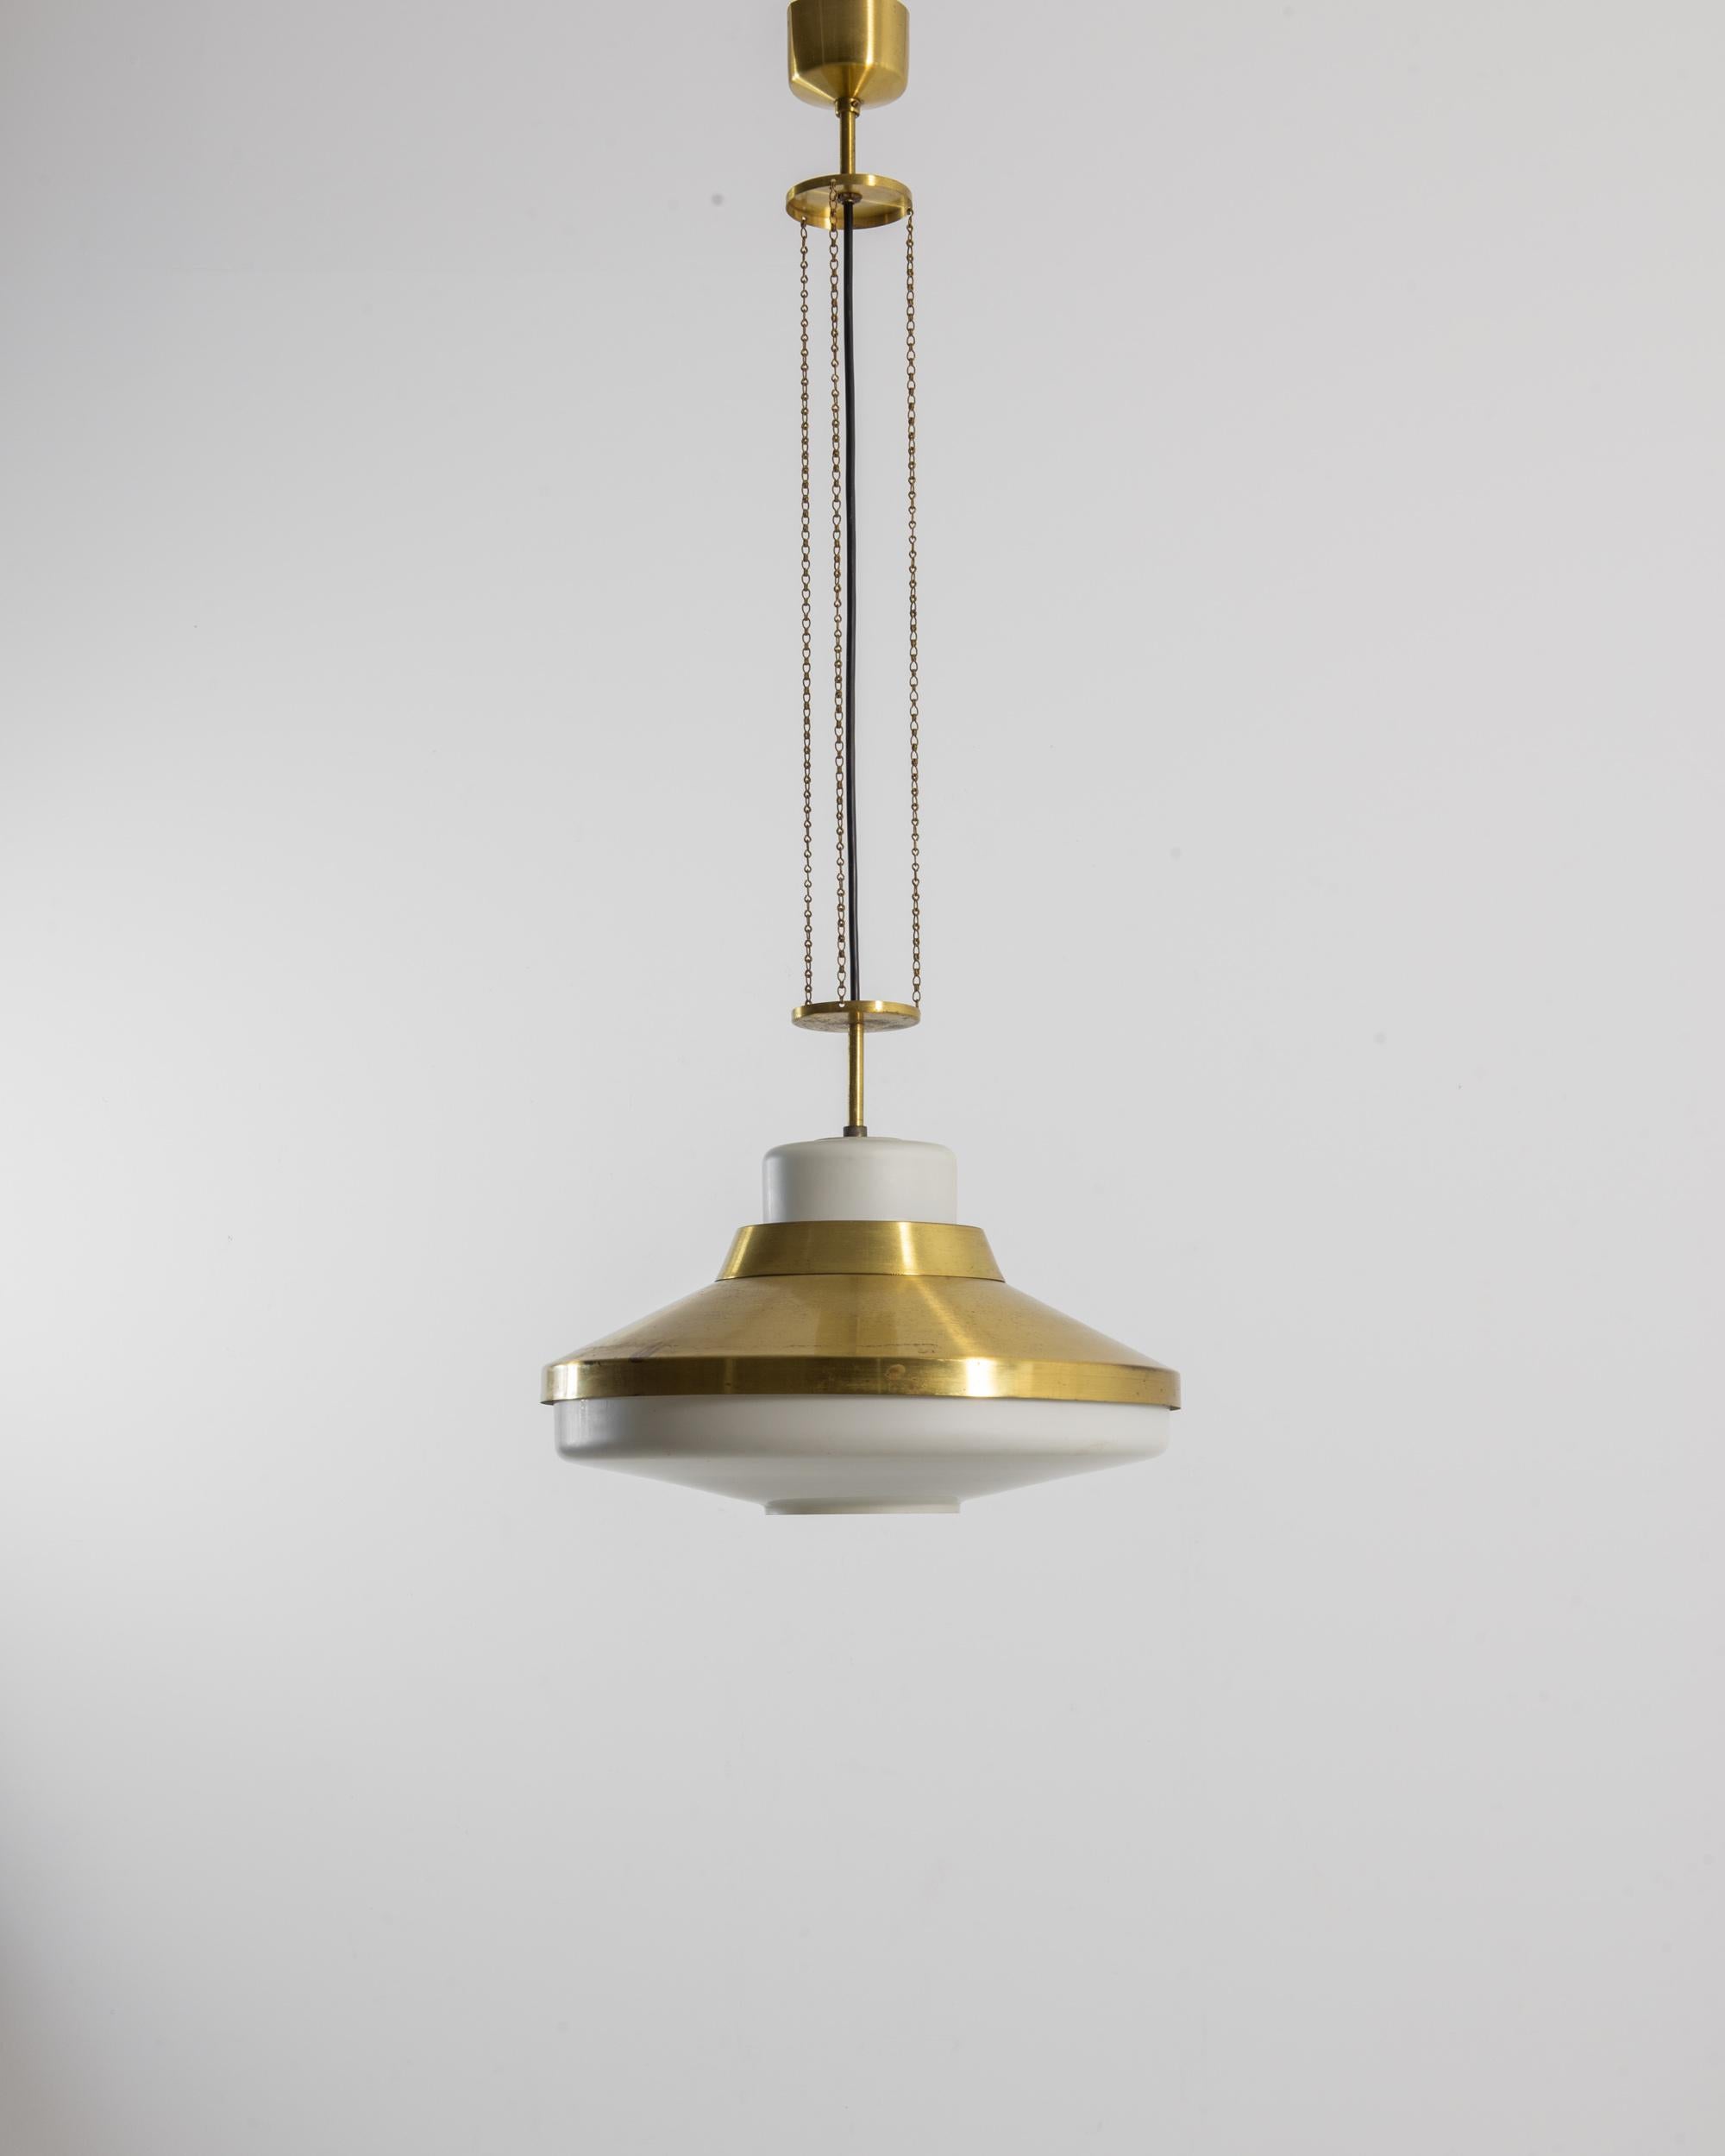 Art Deco glamor meets Industrial simplicity in this vintage brass pendant lamp. Made in Czechia in the 1970s, the wide, streamlined slope of the lamphead is suspended from a slender arrangement of disks and chains, which bring a three-fold symmetry